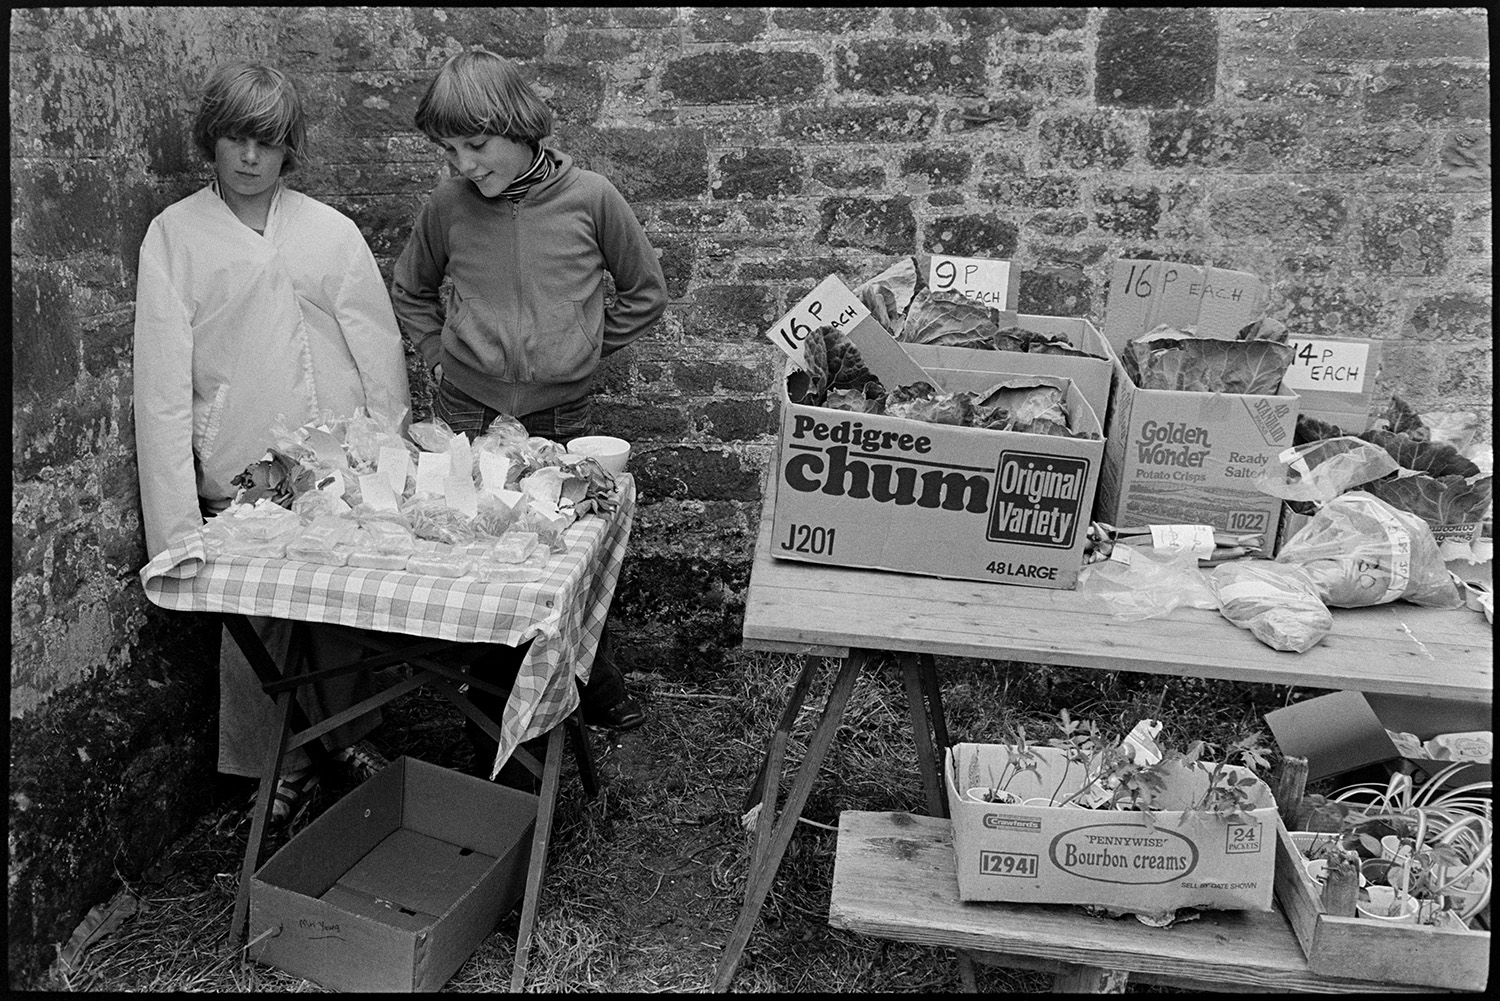 Produce stall at Flower Show. 
[Two children running a stall at Marwood Flower Show. The table next to them has plants and vegetables for sale, including cabbages, rhubarb and tomatoes.]